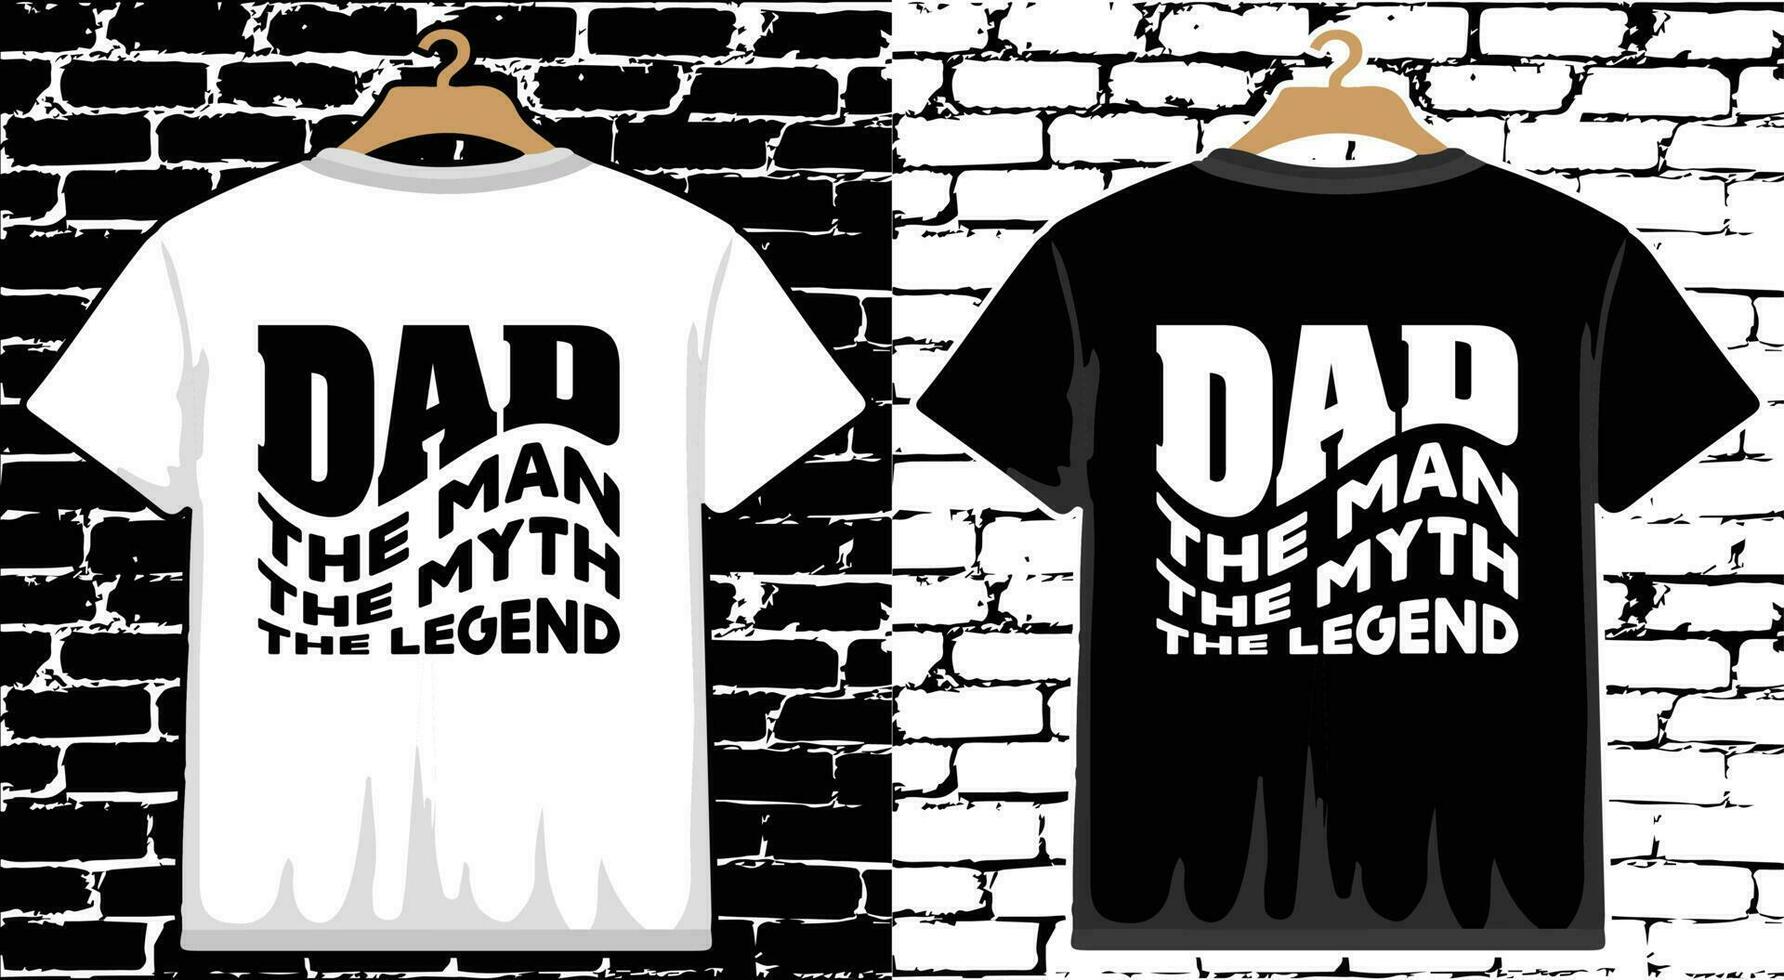 Father's Day T shirt Design, vector Father's Day T shirt  design, Dad shirt, Father typography T shirt design